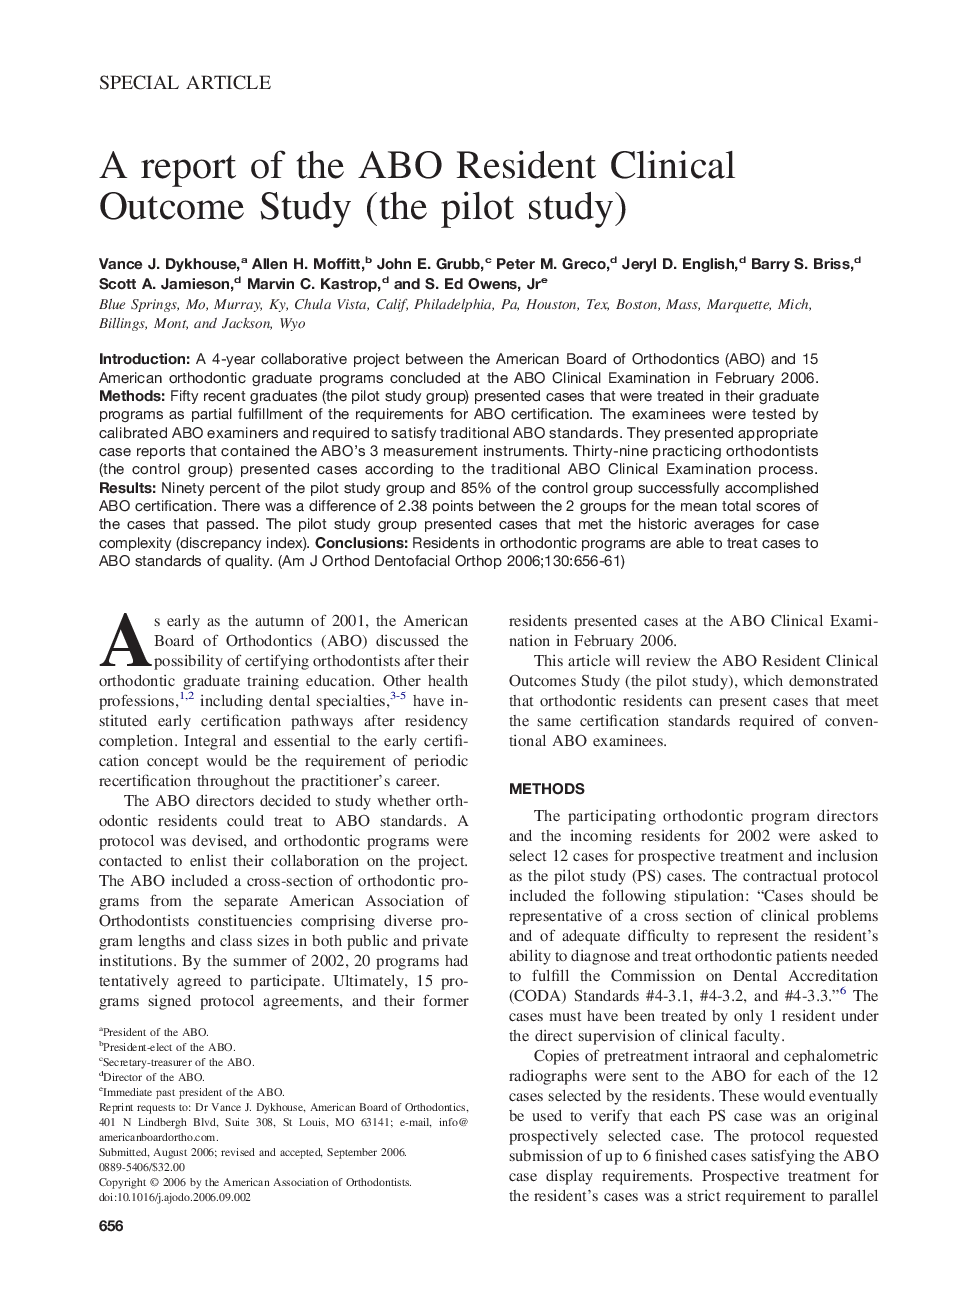 A report of the ABO Resident Clinical Outcome Study (the pilot study)